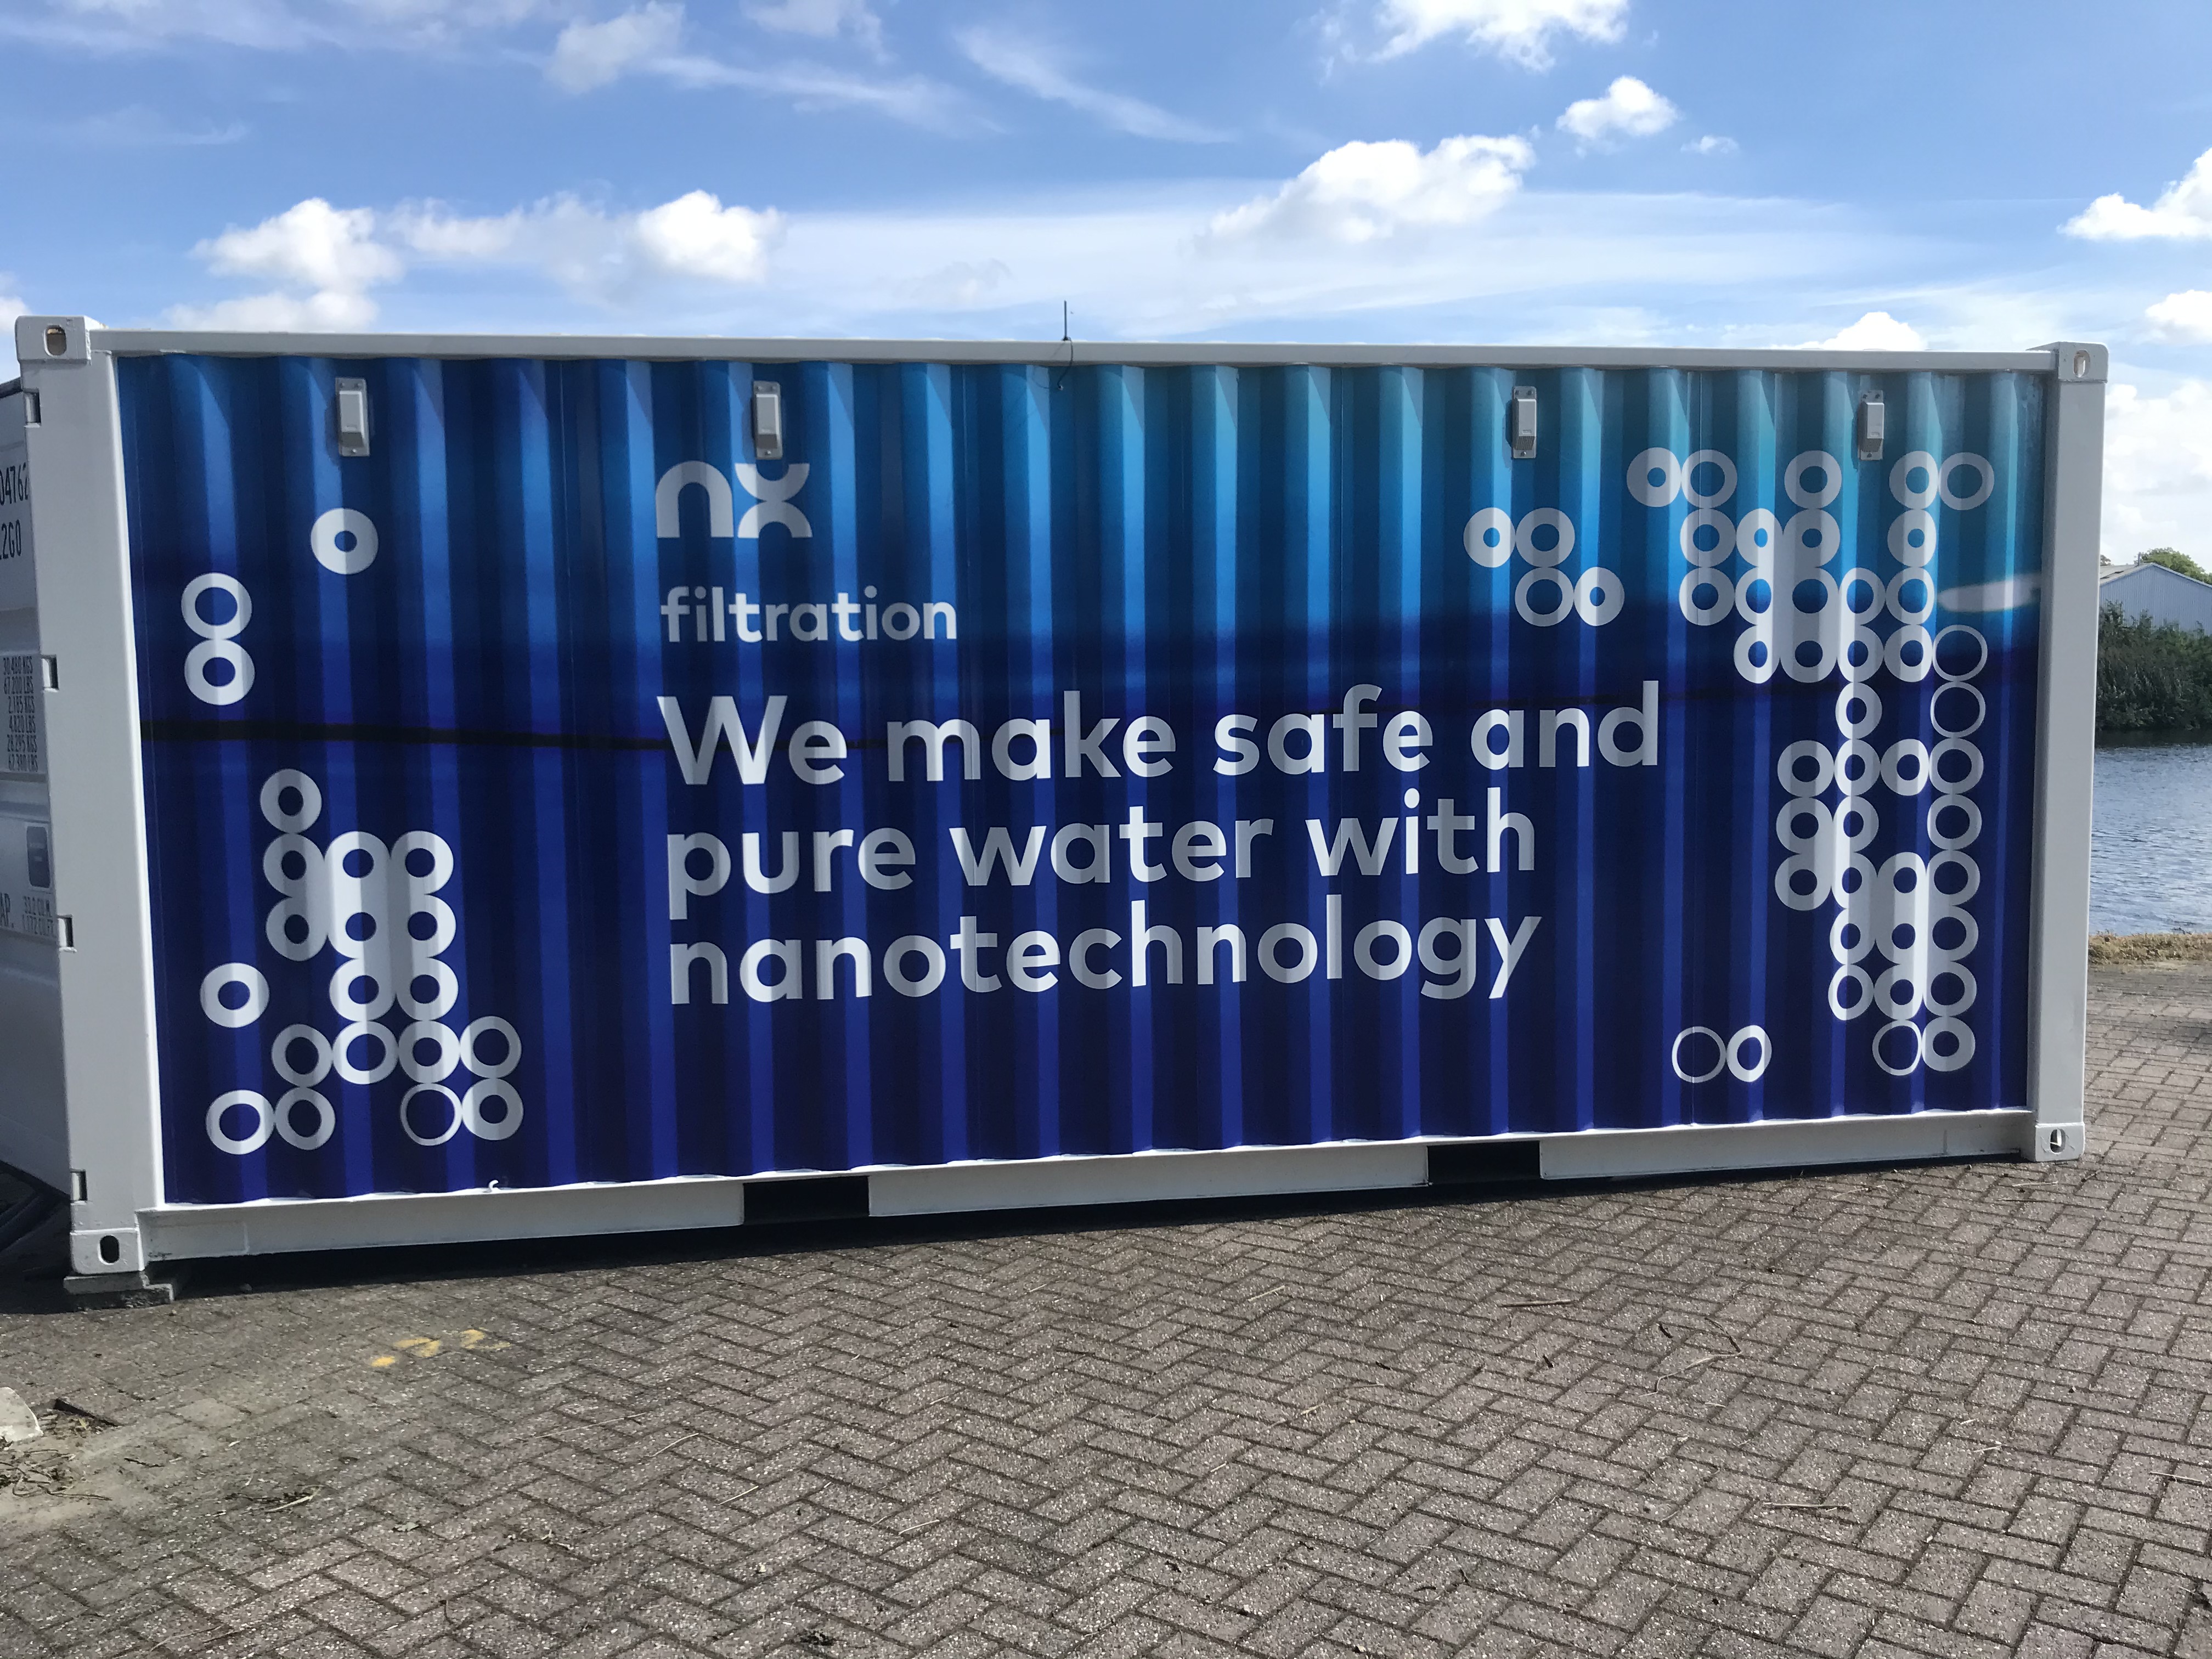 NX Filtration’s mobile hollow fibre nanofiltration system at the Twentekanaal in the Netherlands.